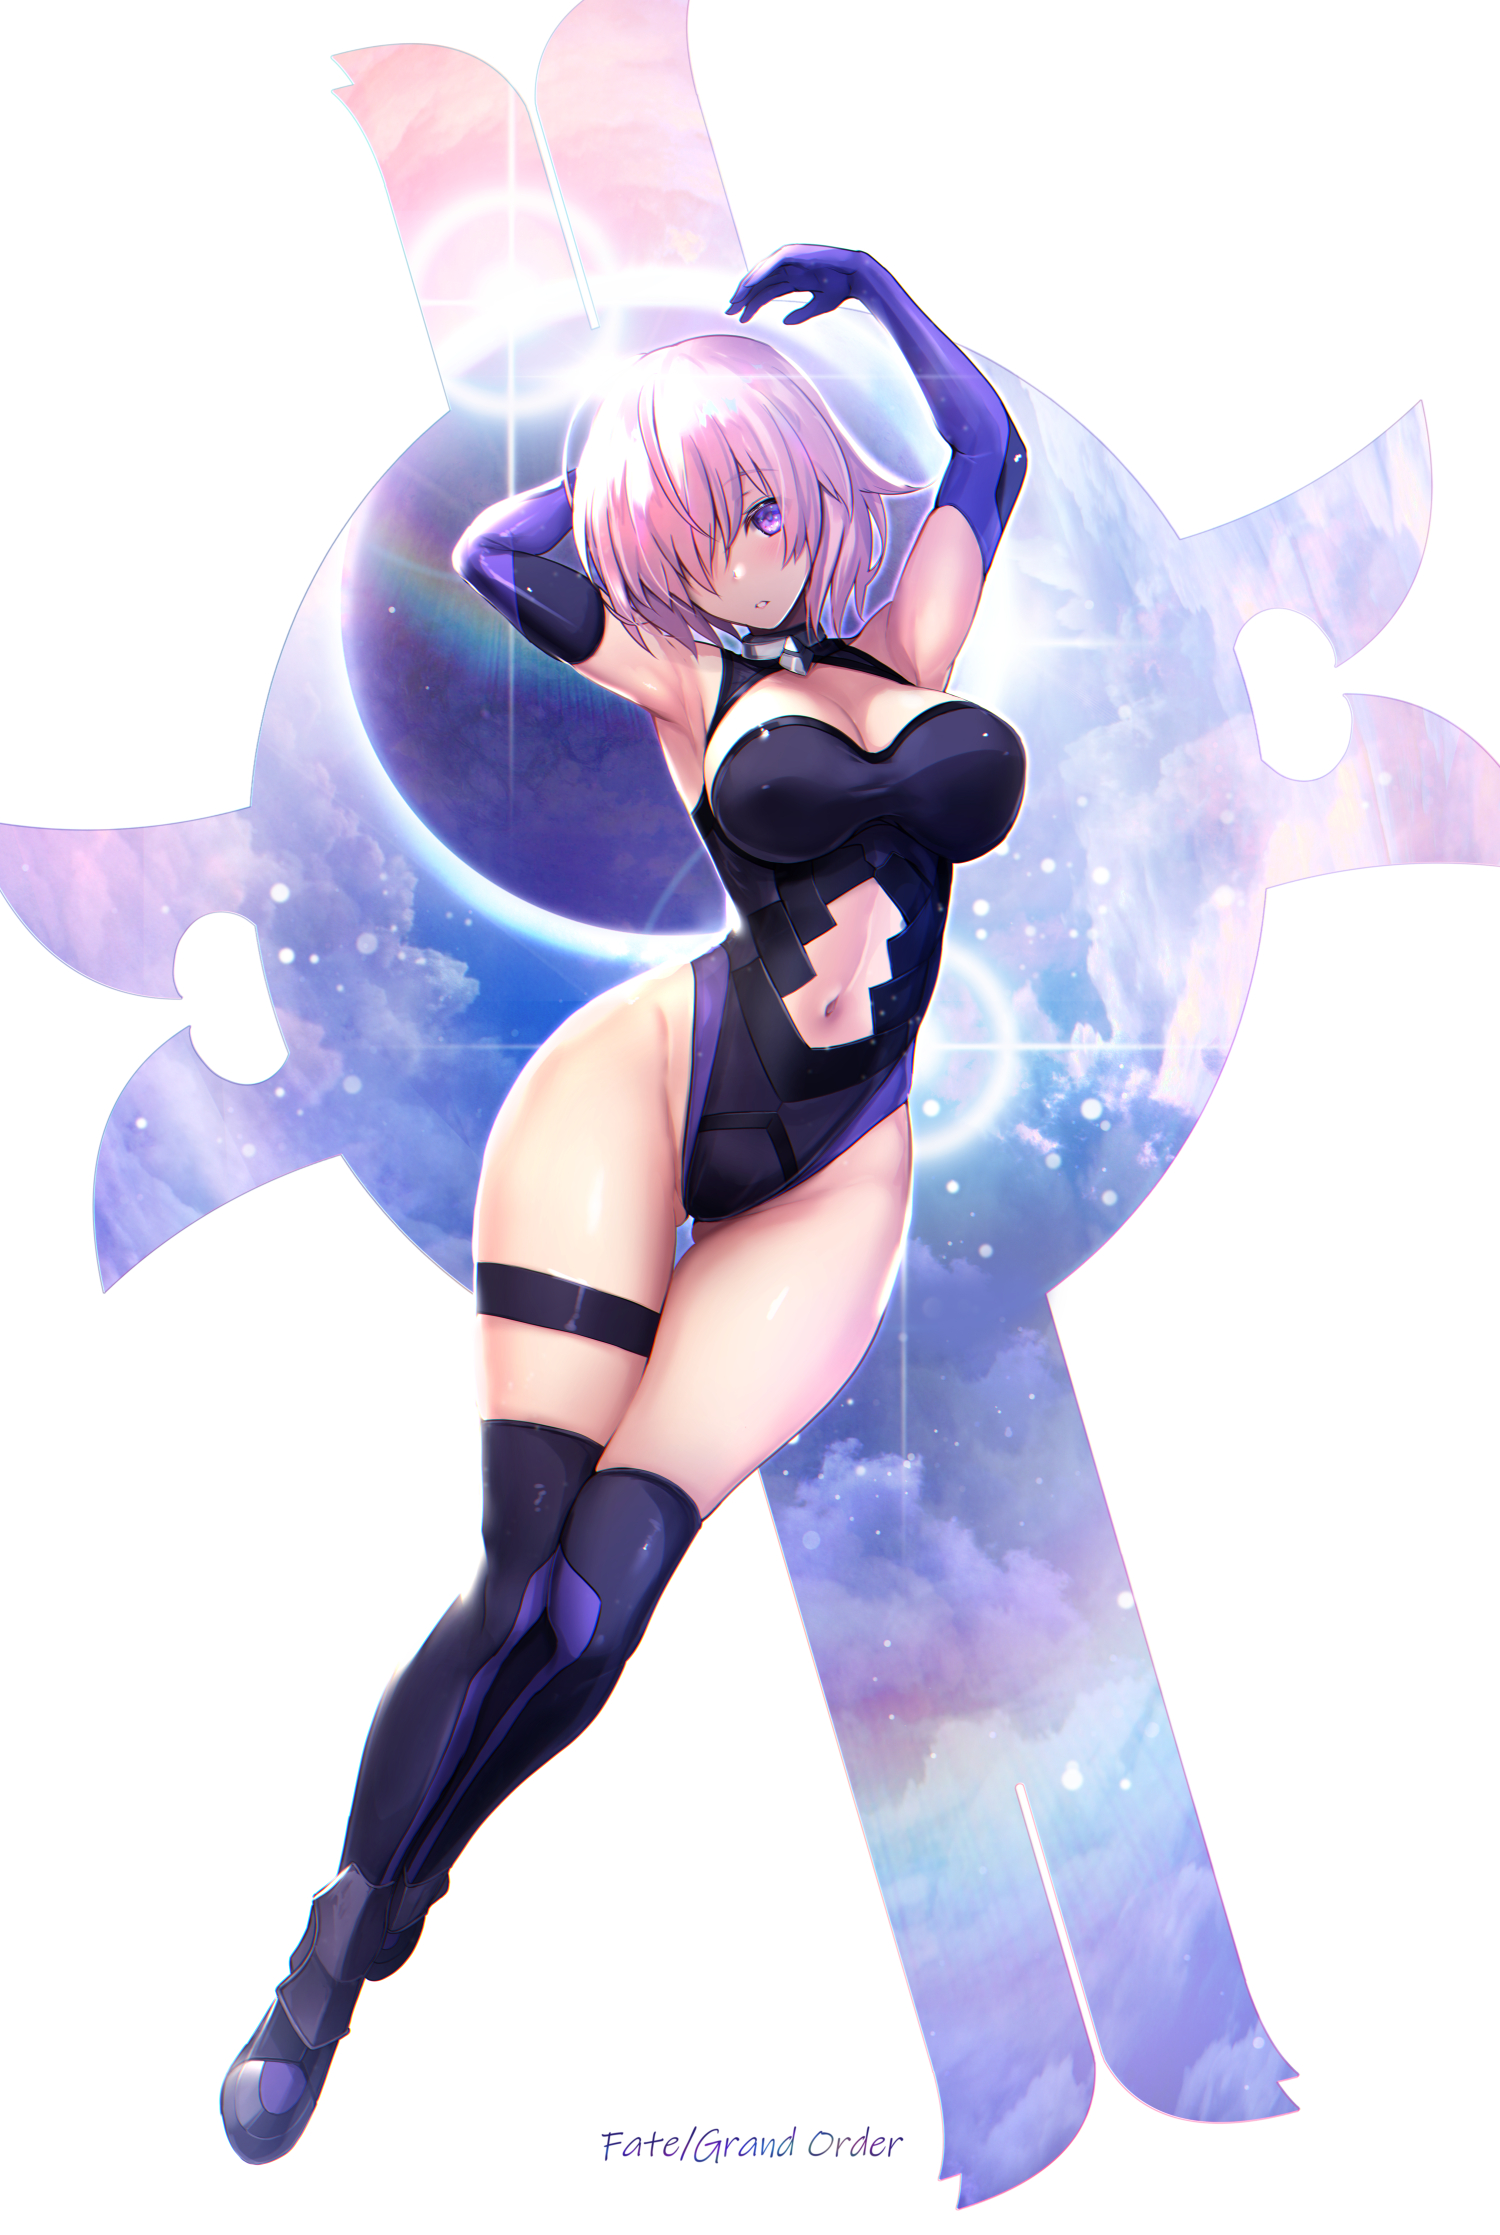 Anime 1500x2235 Fate/Grand Order Mash Kyrielight anime girls boobs big boobs arms up anime Fate series